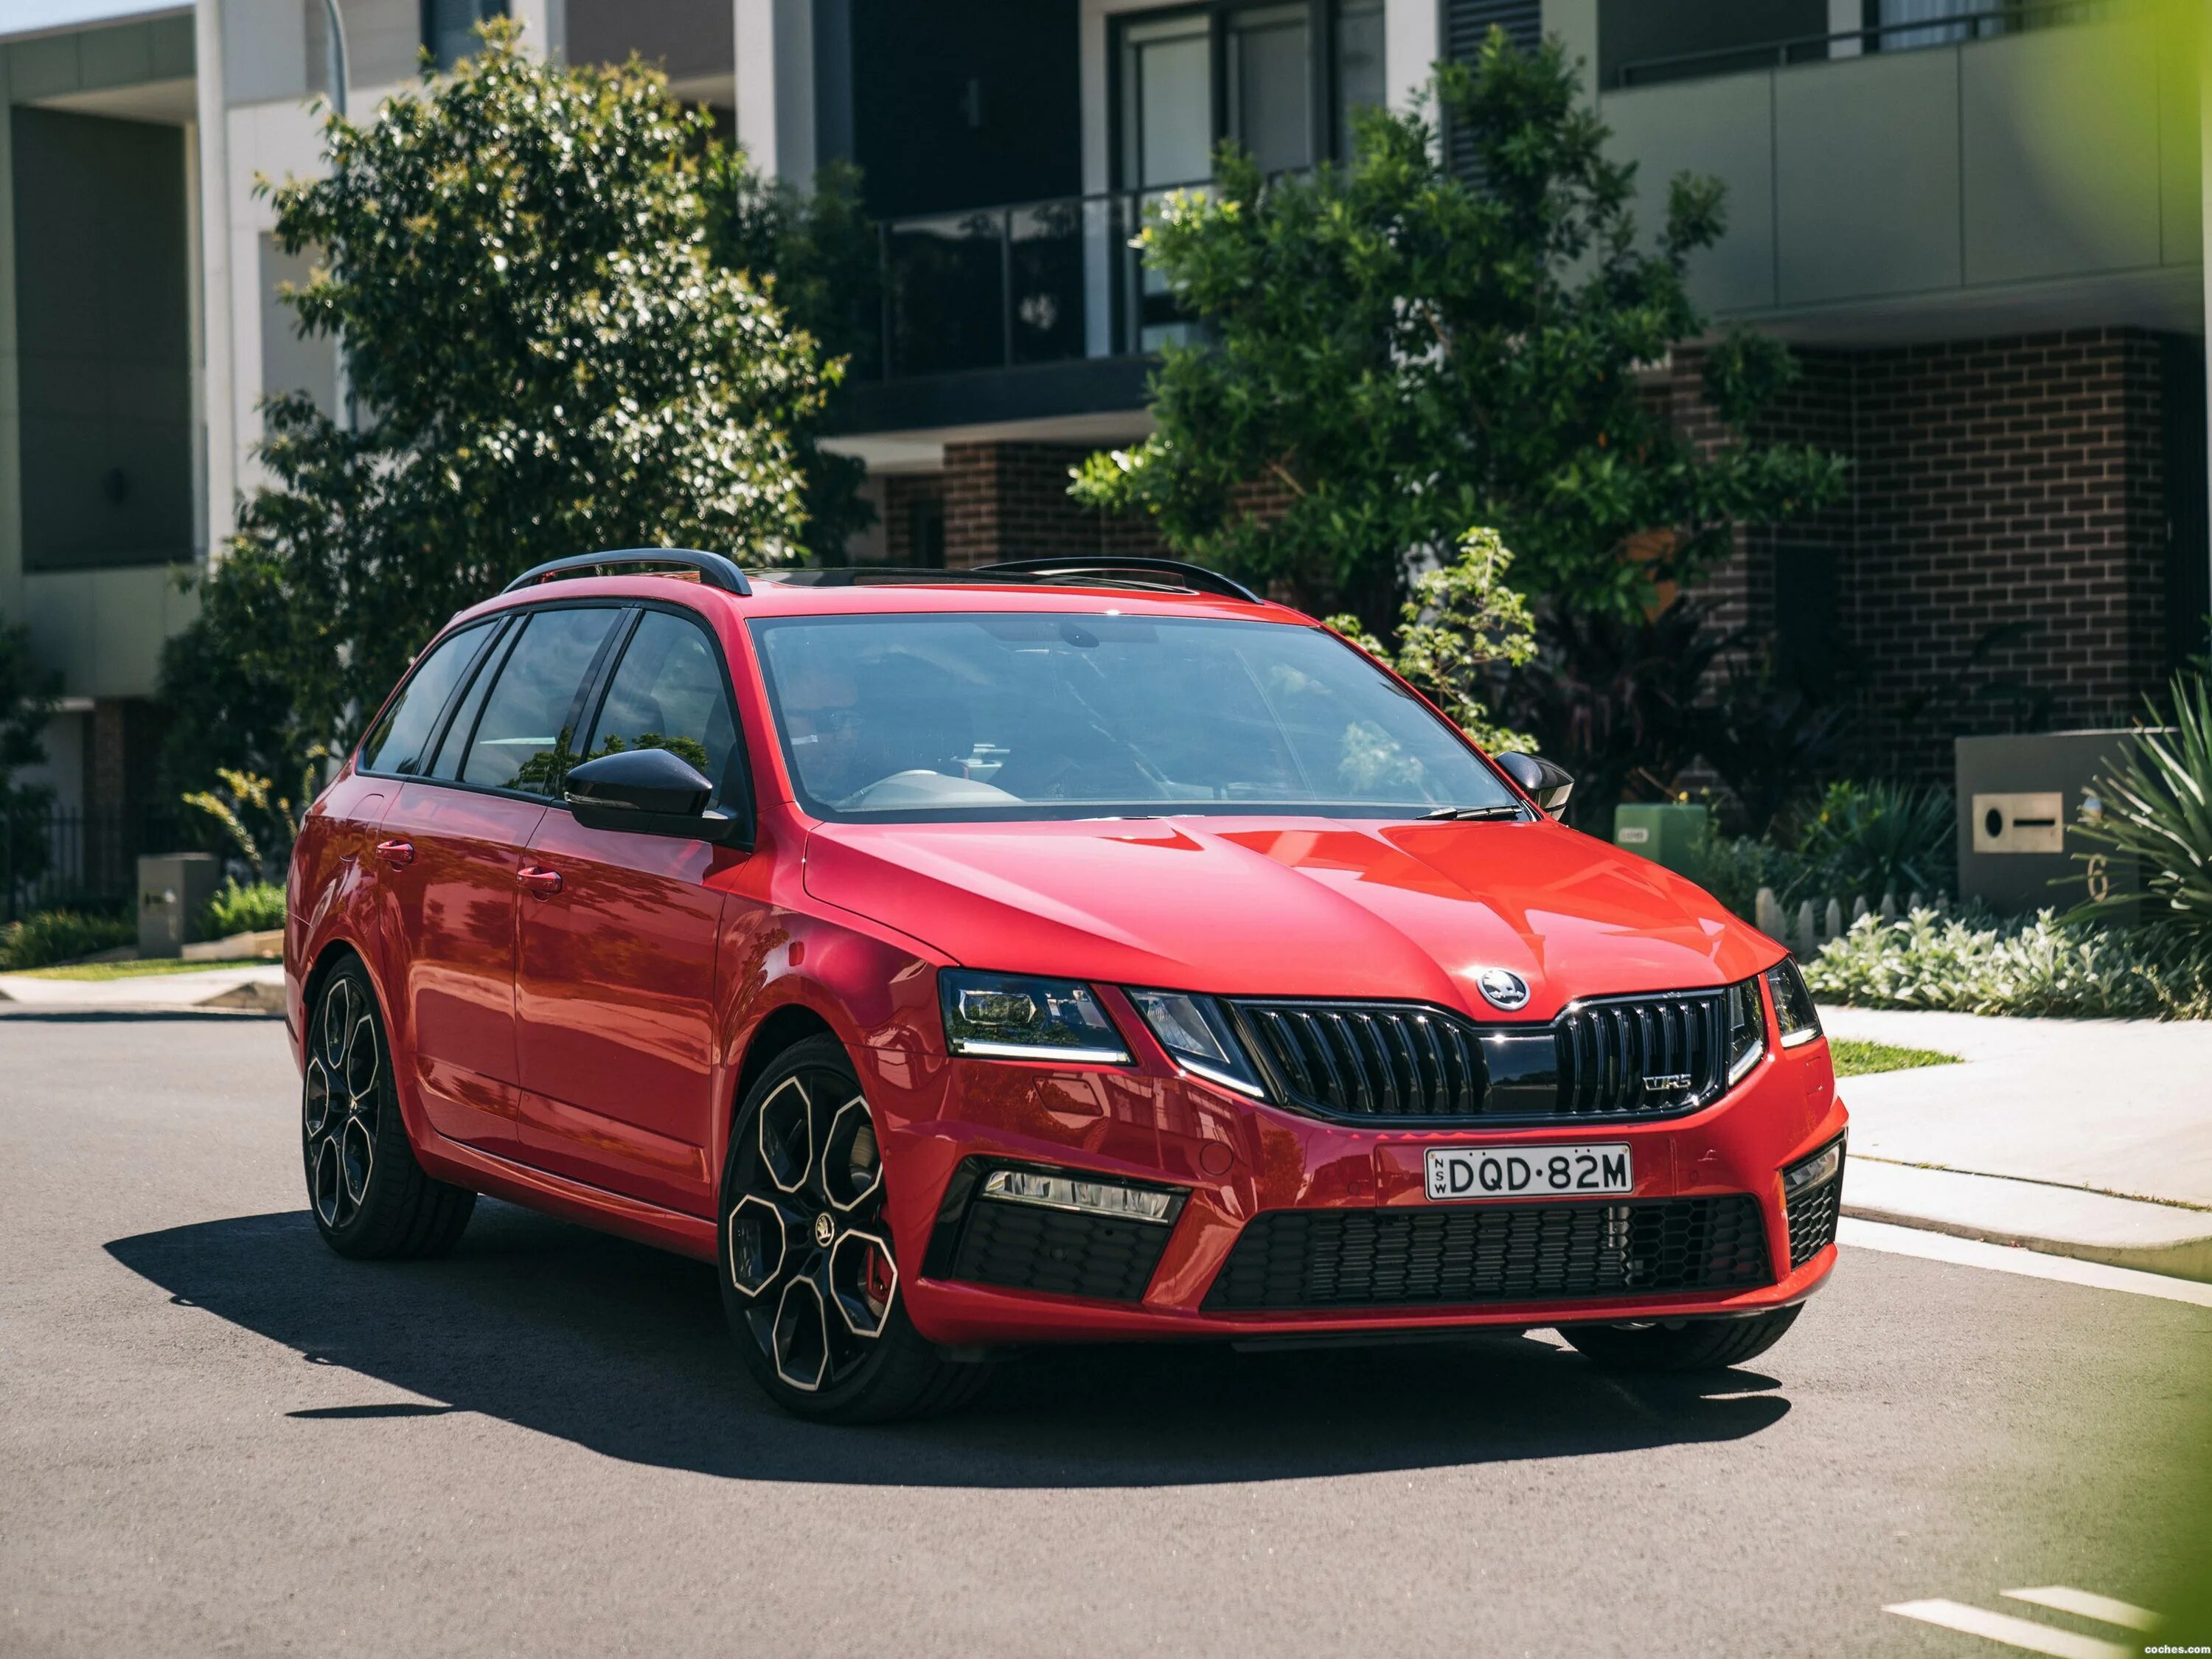 Skoda octavia rs 2019. Skoda Octavia RS 2018. Skoda Octavia RS 245.